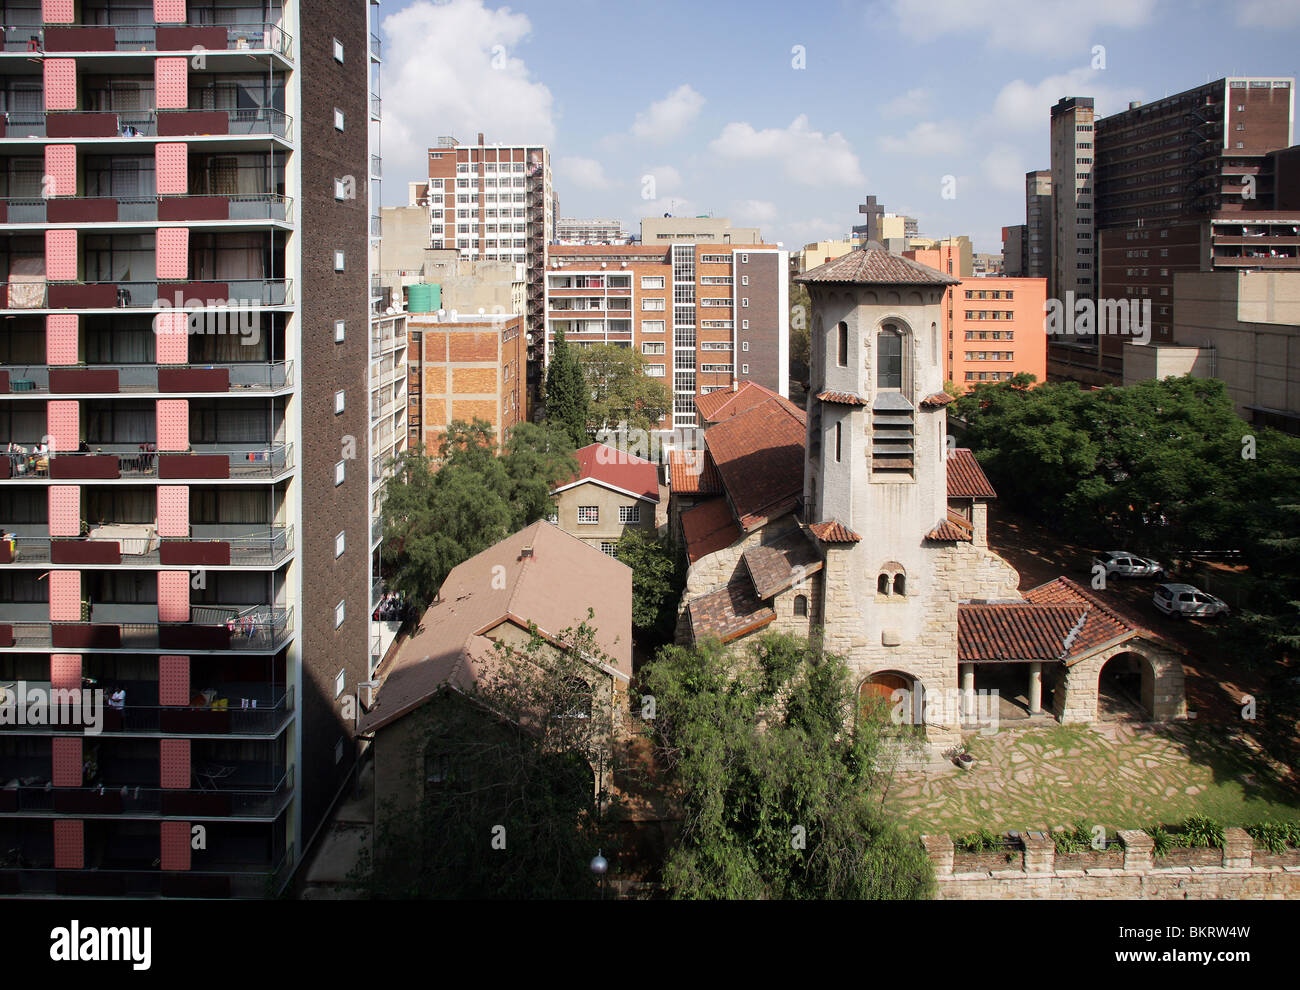 Lutheran peace church in the middle of dwelling-houses in the district Hillbrow, Johannesburg, South Africa Stock Photo